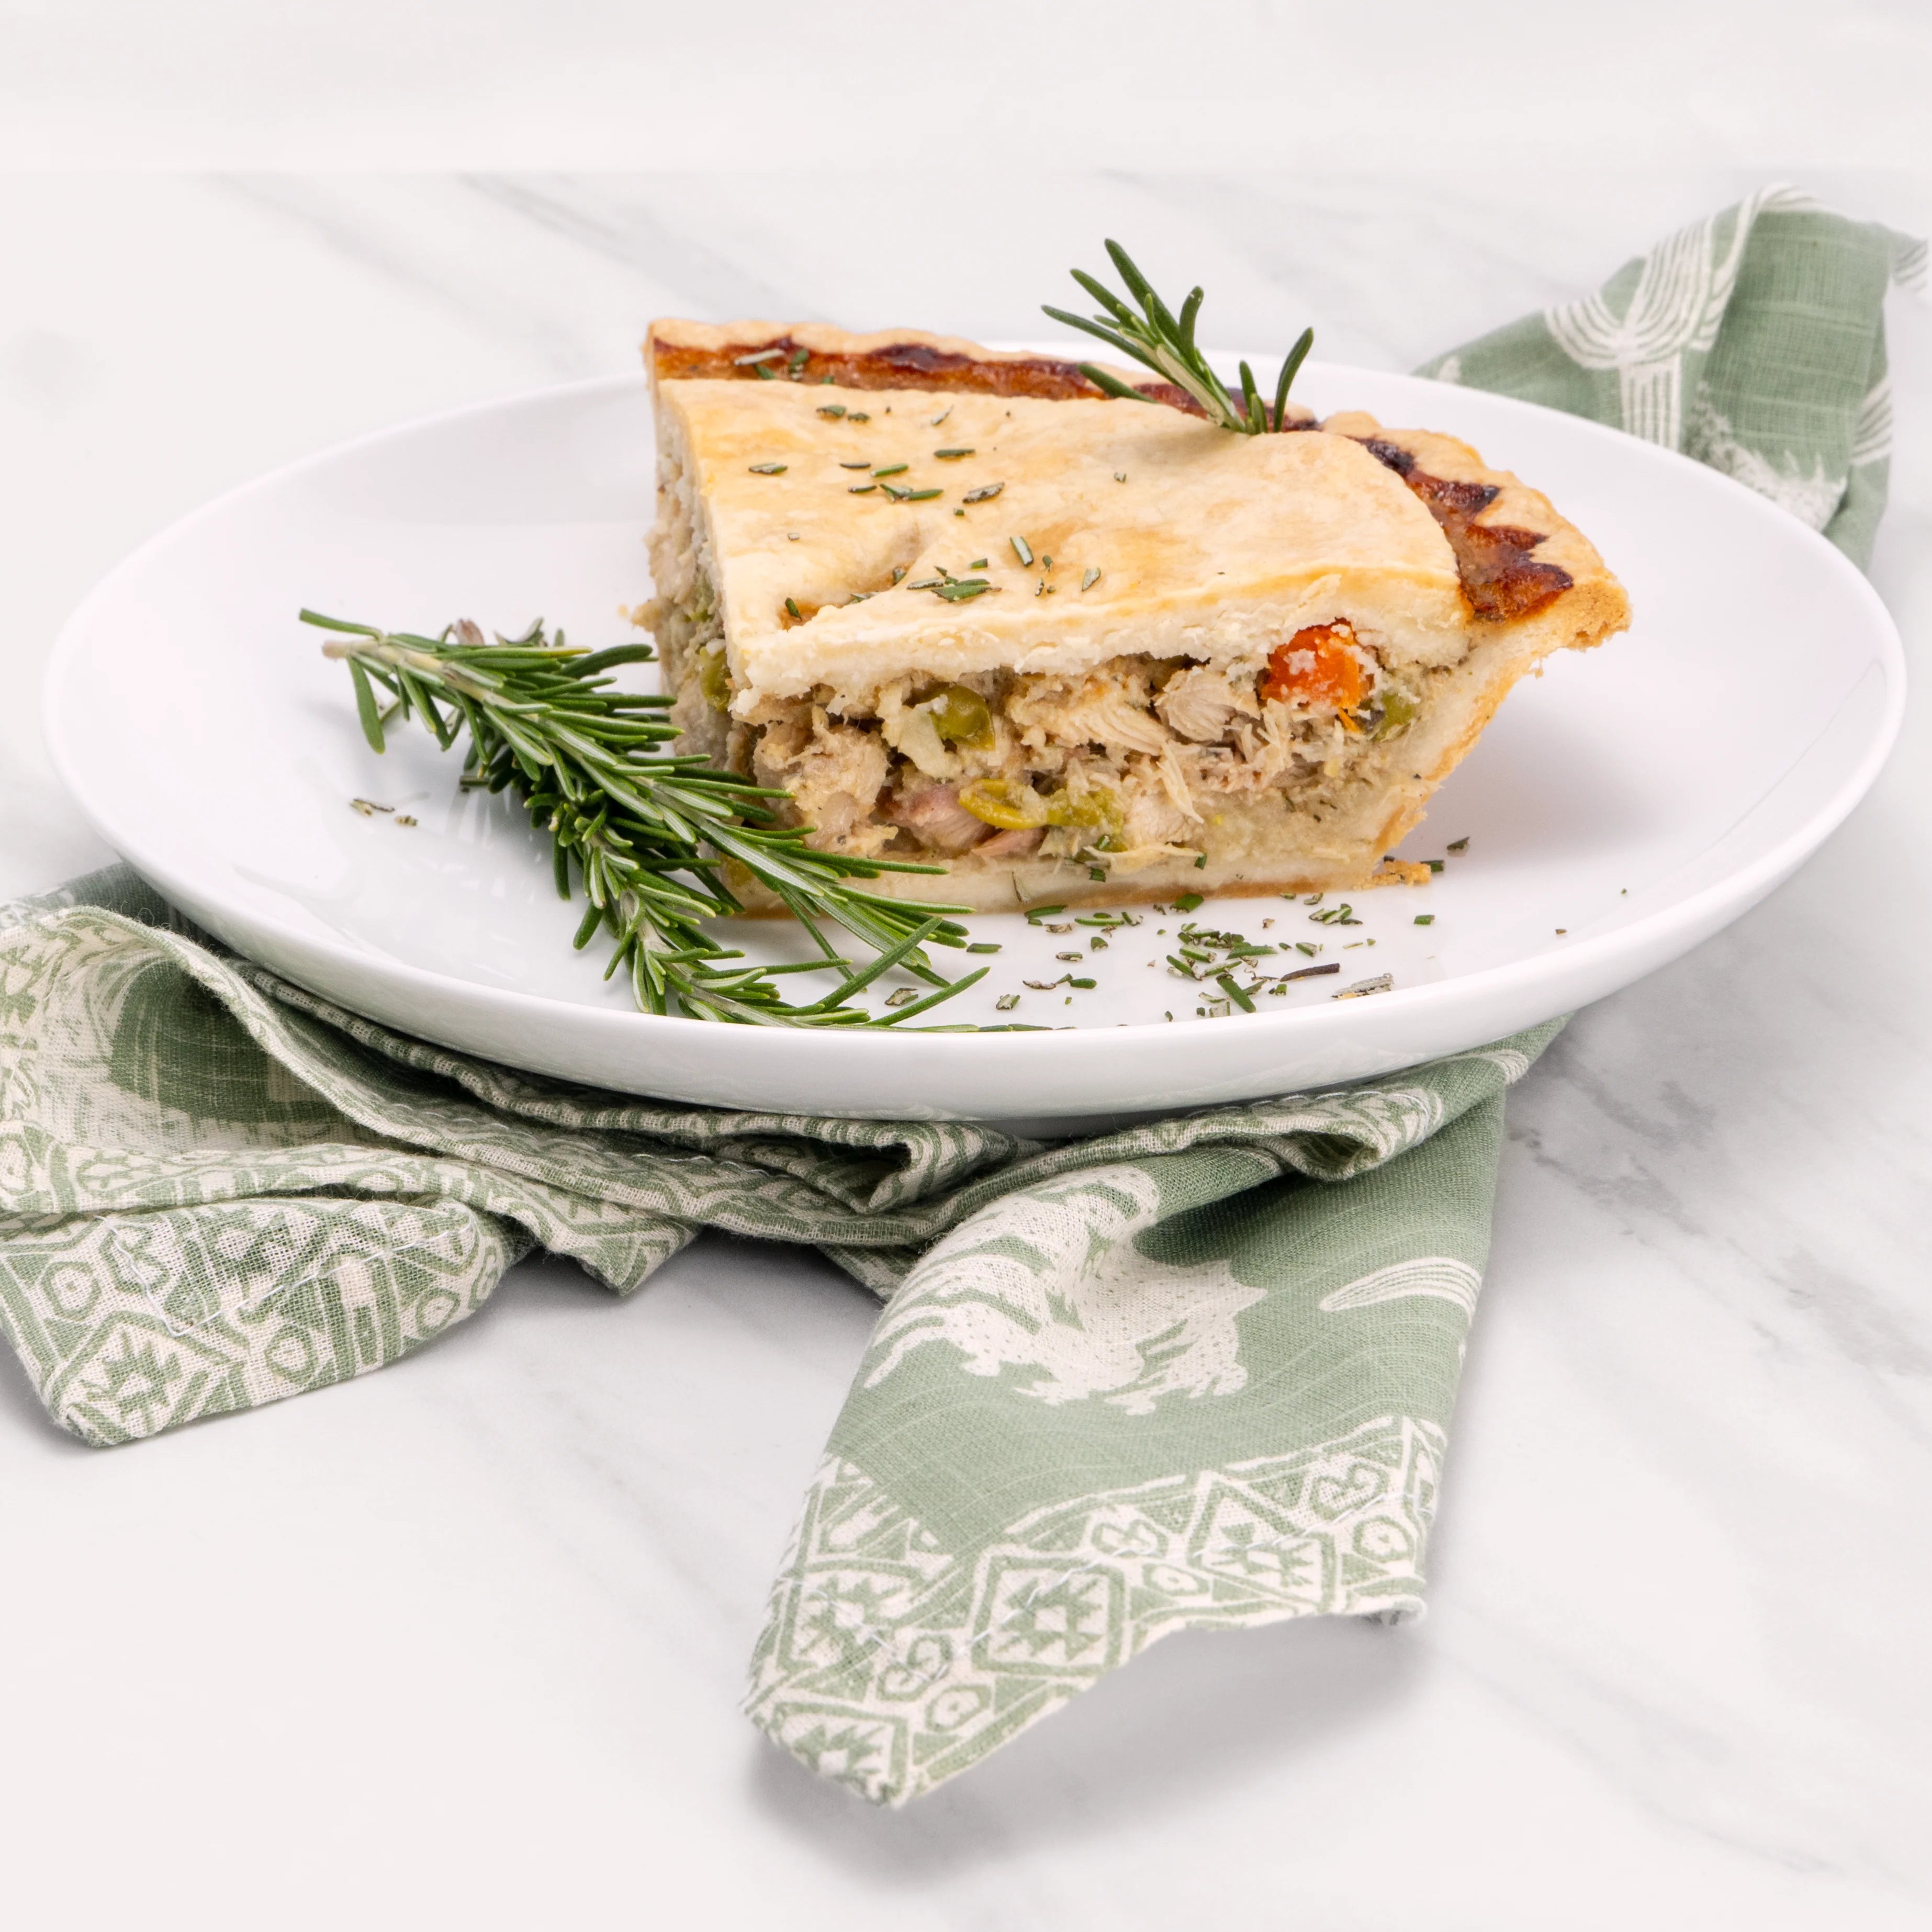 Slice of Chicken Pot Pie garnished with rosemary. 